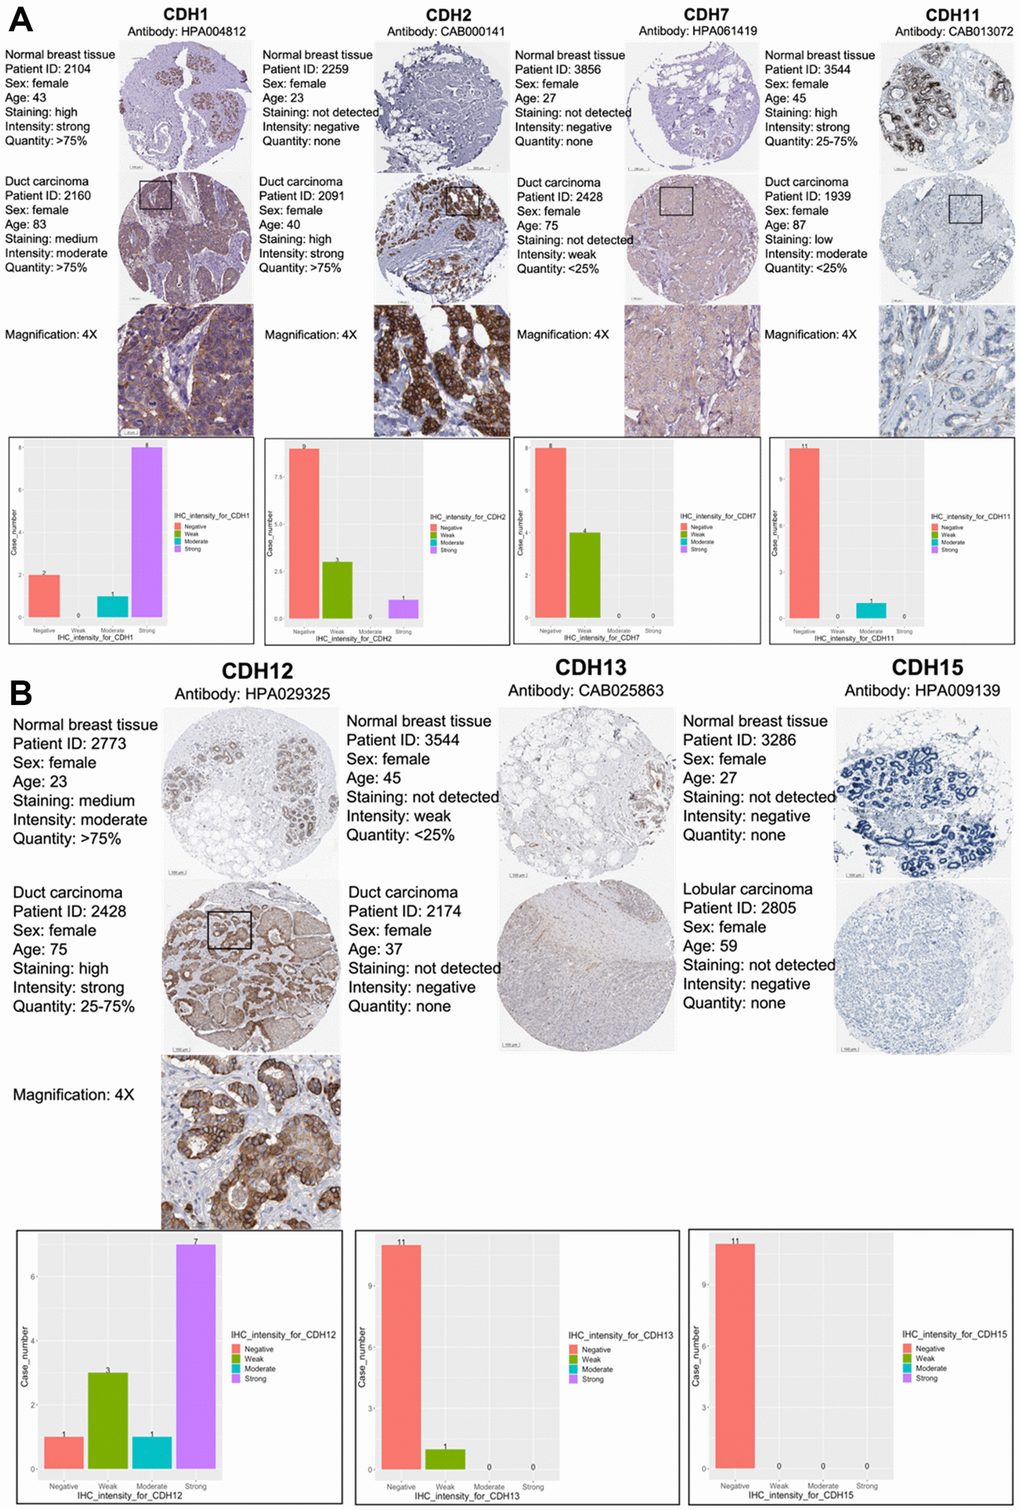 Protein expression levels of members of cadherin (CDH) family genes in all clinical breast cancer specimens from the Human Protein Atlas (HPA). (A) Images of immunohistochemistry (IHC) of CDH1/2/7/11 show their staining intensities. IHC images and patients’ information were obtained from the HPA. Normal and tumor samples are listed, and bar charts represent the quantification of IHC staining in breast cancer samples. There were strong intensities of CDH1 and CDH2 in breast cancer samples. (B) IHC images of CDH12/13/15 show their staining intensities. IHC images and patient information were obtained from the HPA. Normal and tumor samples are listed, and bar charts present quantification of IHC staining in breast cancer samples. There were strong intensities of CDH12 in breast cancer samples.